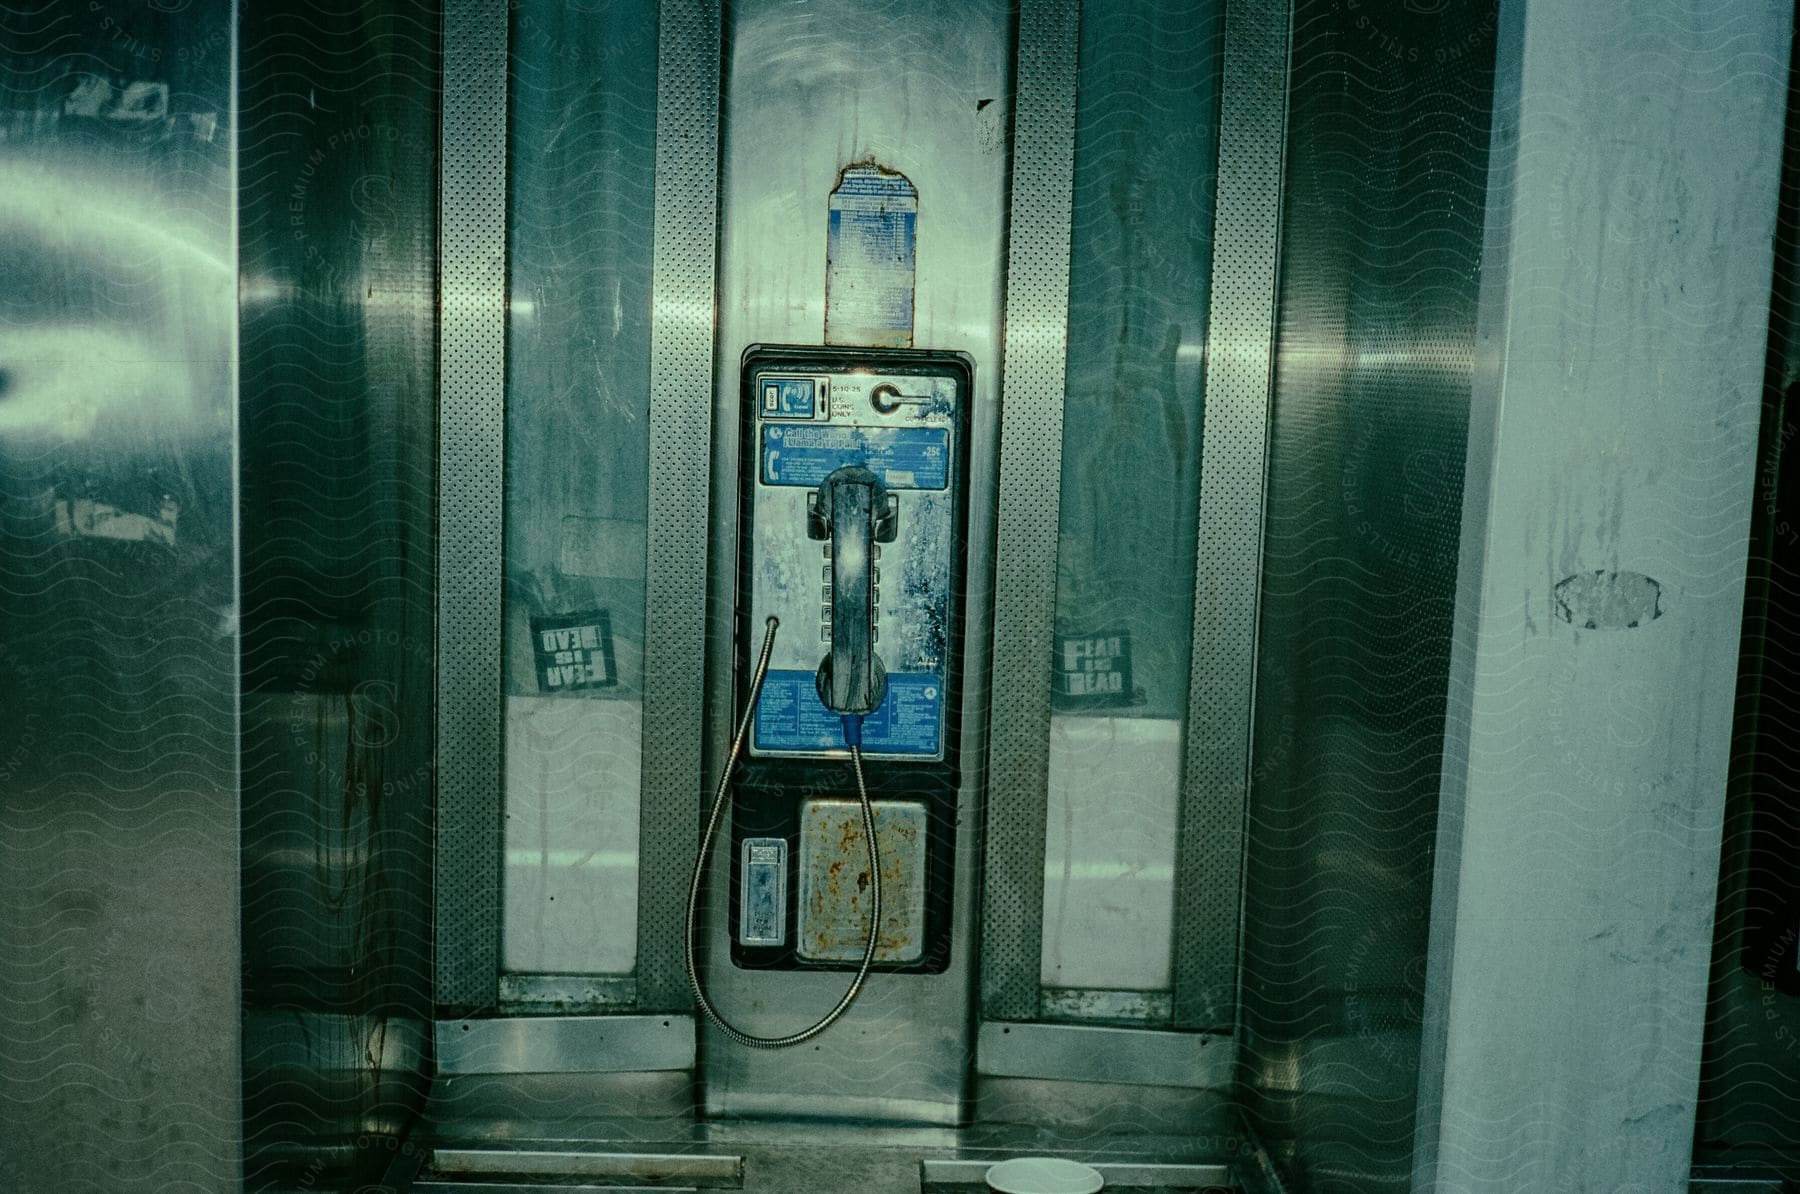 An old payphone